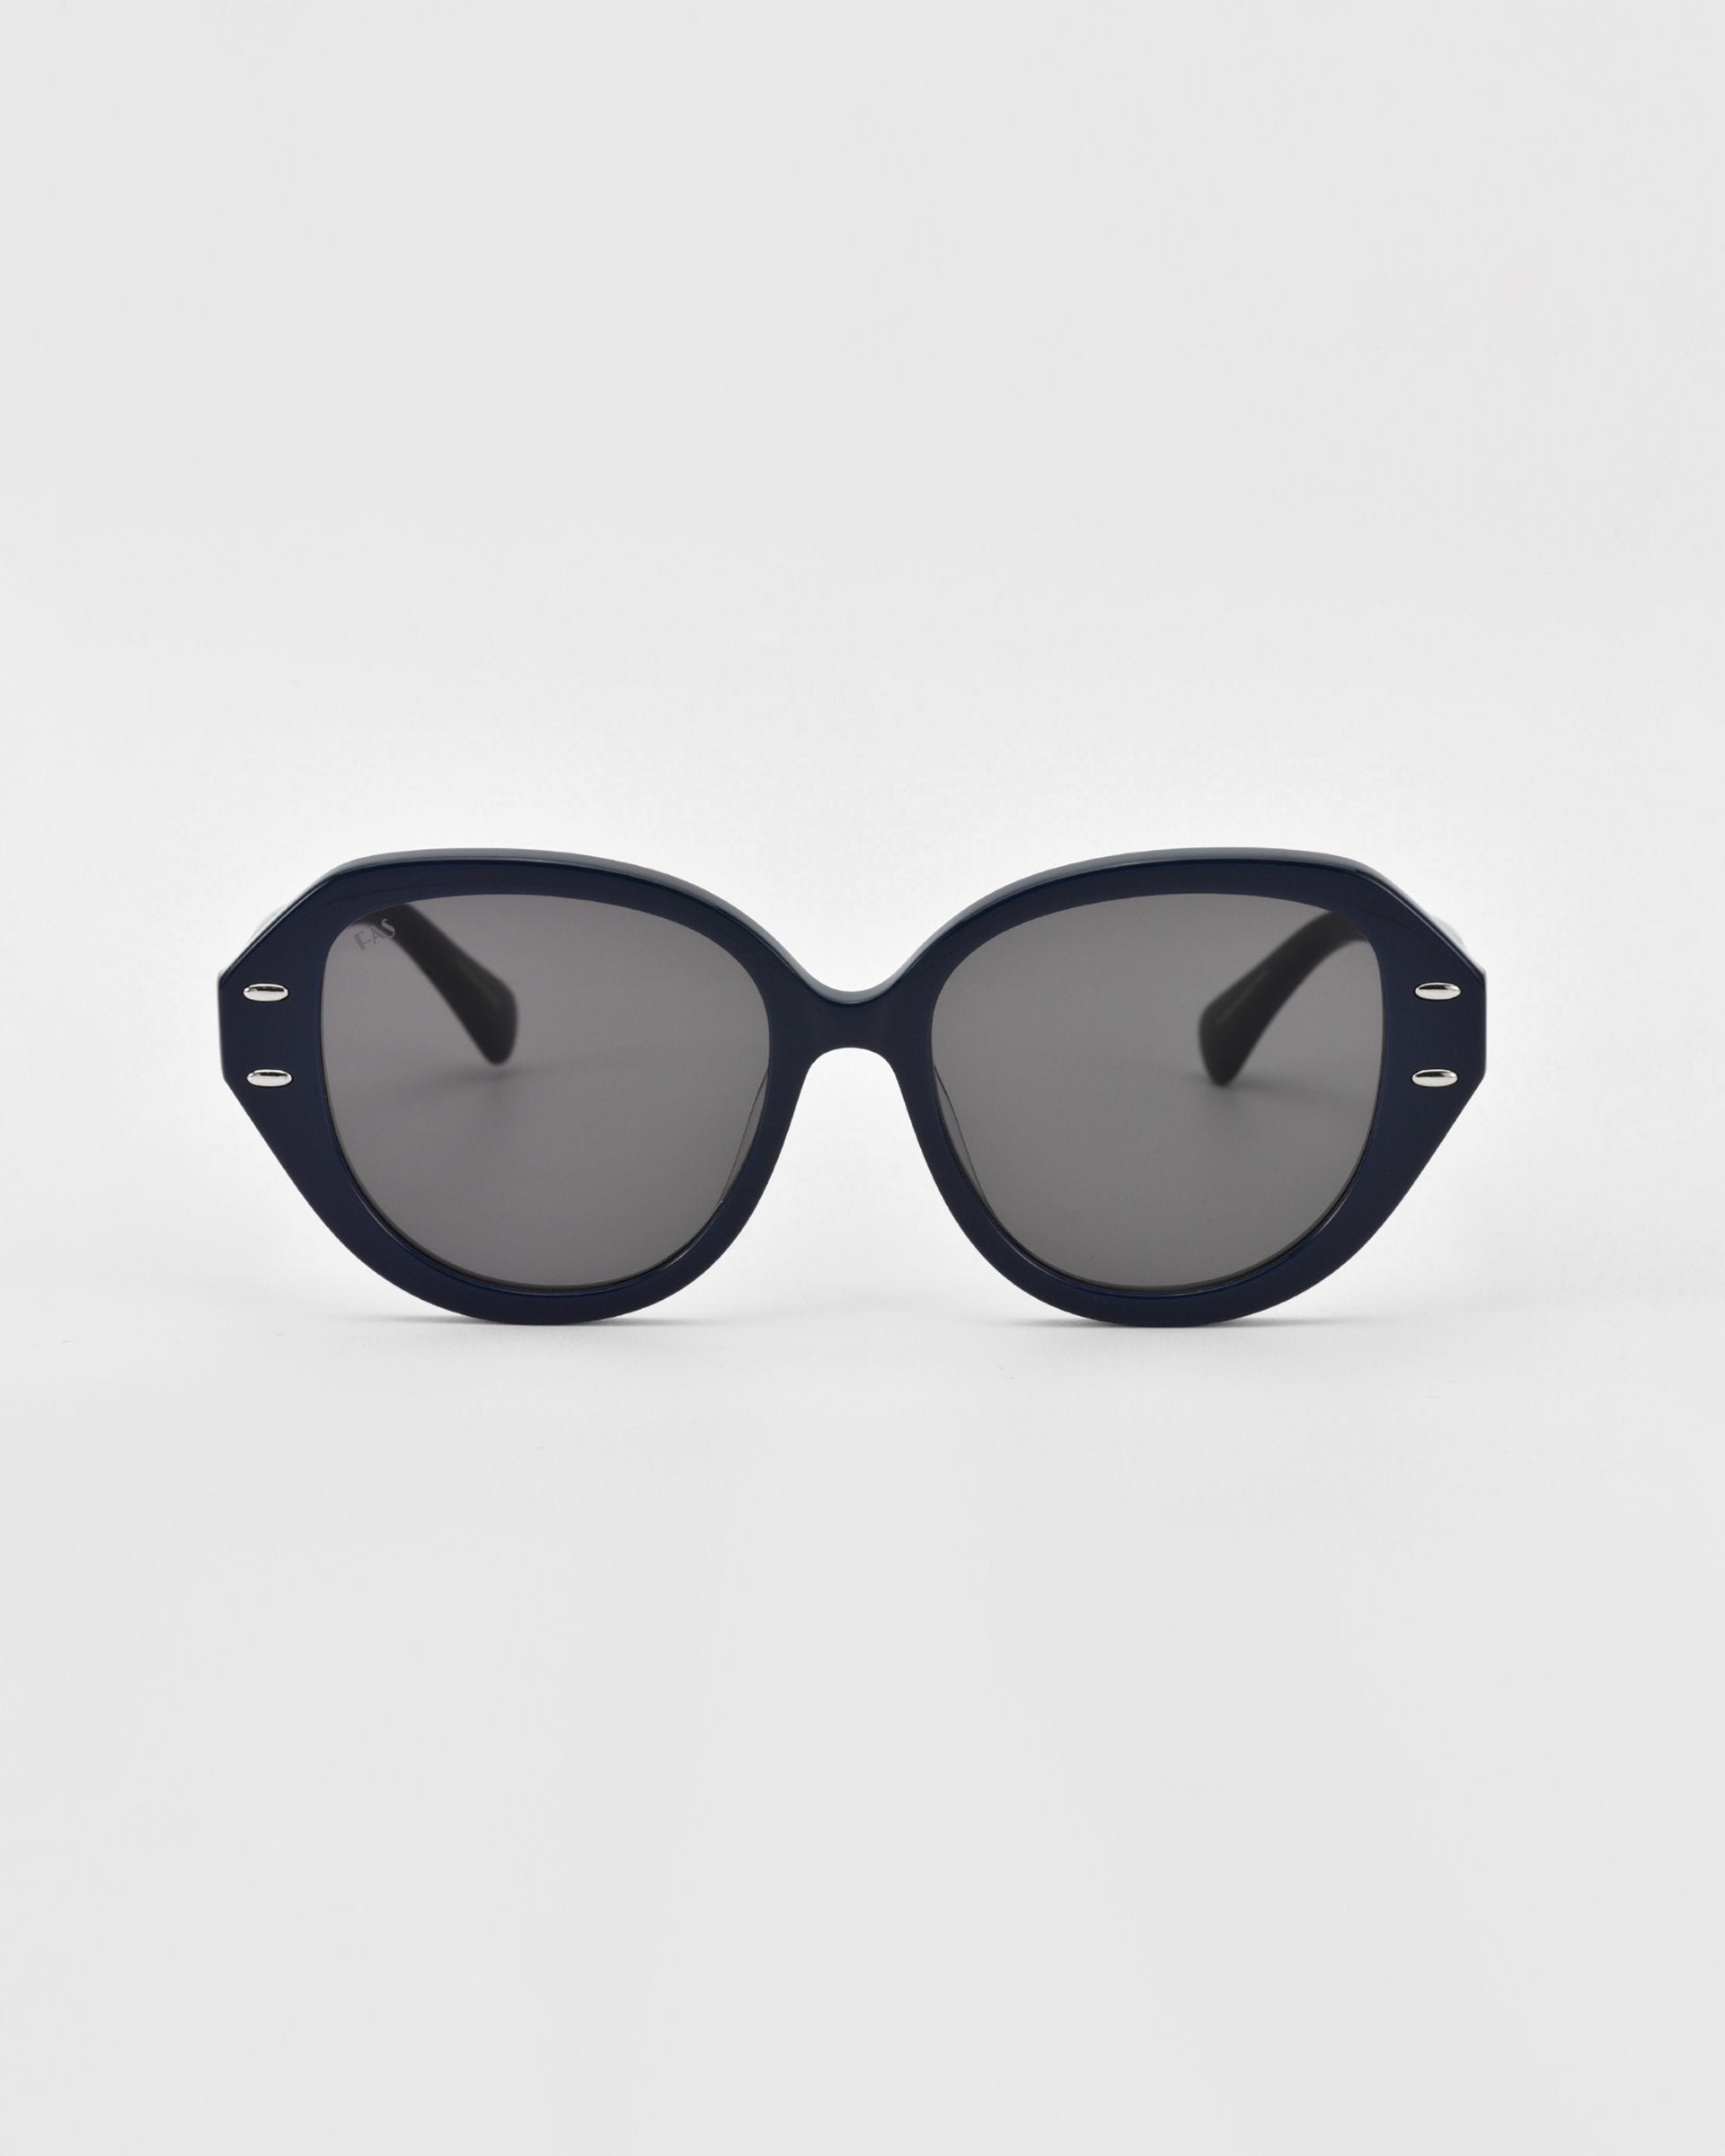 A pair of black oval Mirage sunglasses with dark lenses and a matte black frame made from plant-based acetate by For Art&#39;s Sake®. The frame has small metallic accents near the hinges and sturdy black arms. The Mirage sunglasses are placed on a white background.